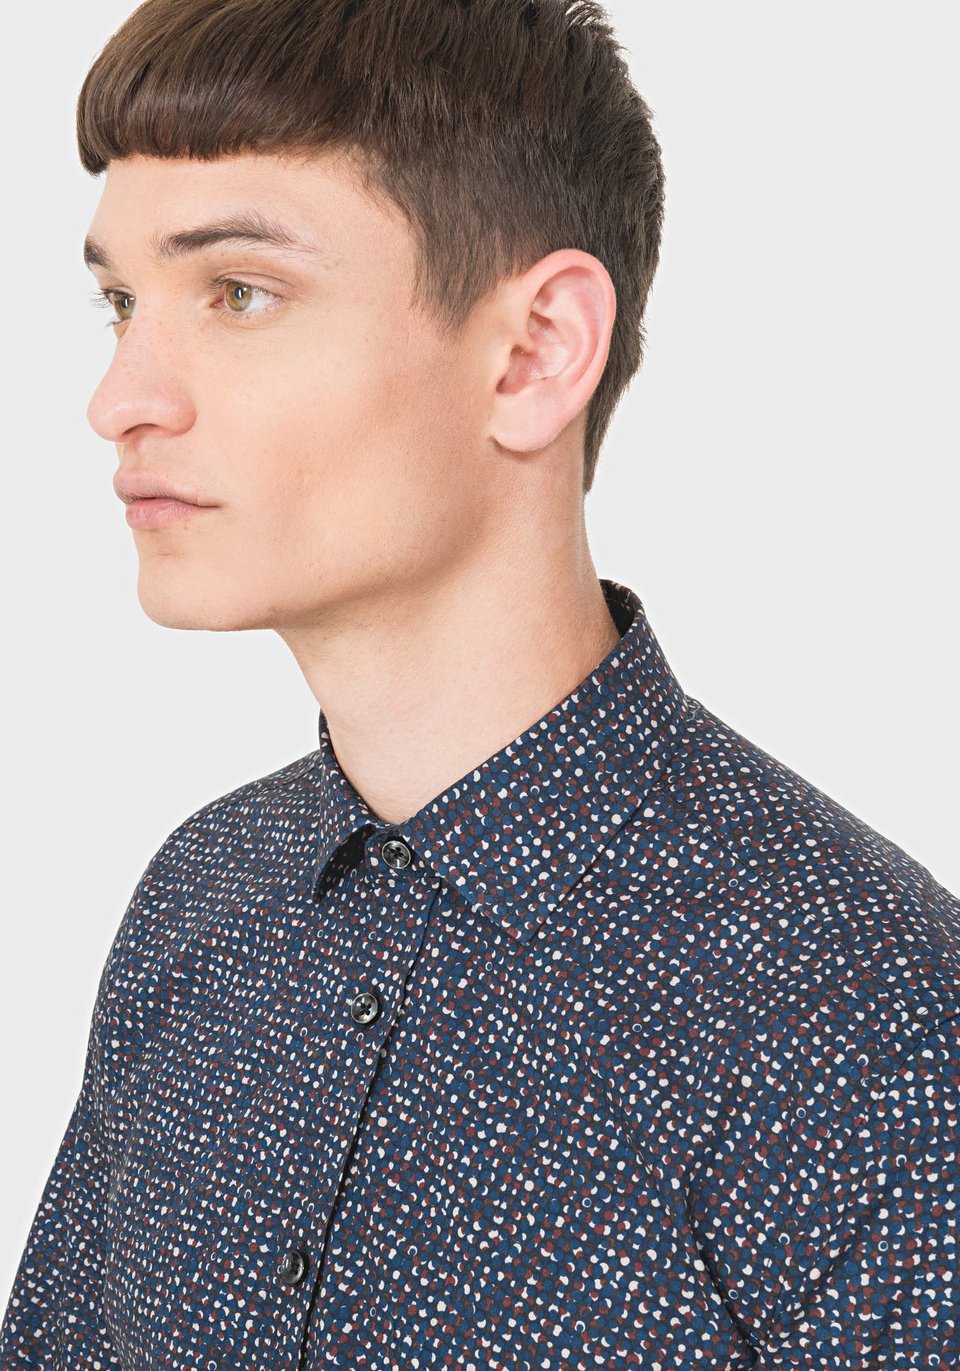 SLIM-FIT SHIRT IN 100% COTTON WITH A PRINT PATTERN - Antony Morato Online Shop